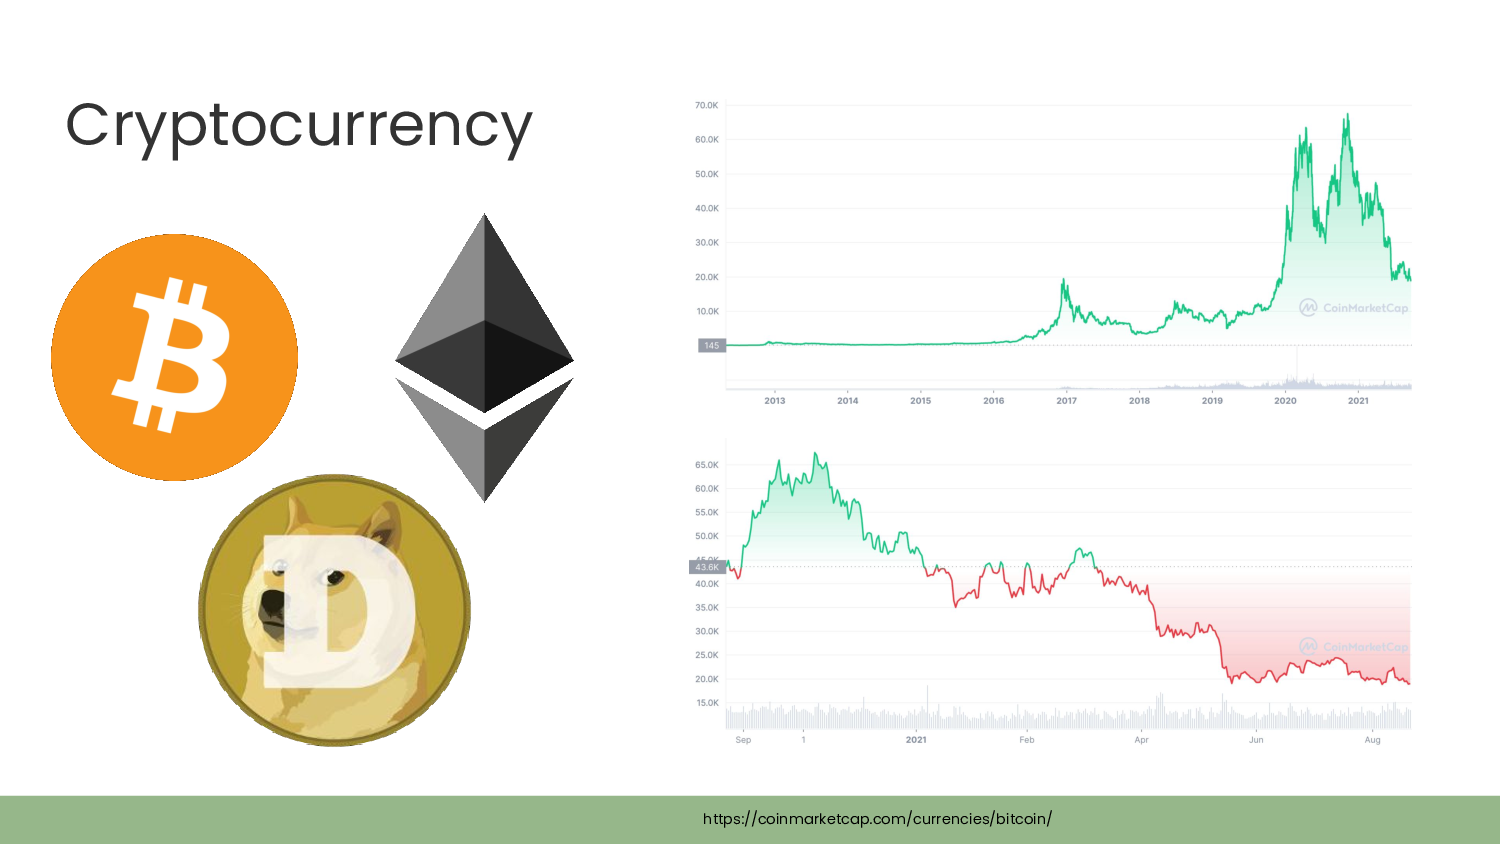 Title: Cryptocurrency. On the left are the logos of Bitcoin, Ethereum, and Dogecoin. On the top right is a chart showing the Bitcoin price over all time. On bottom right is a chart showing the Bitcoin price over the past year.